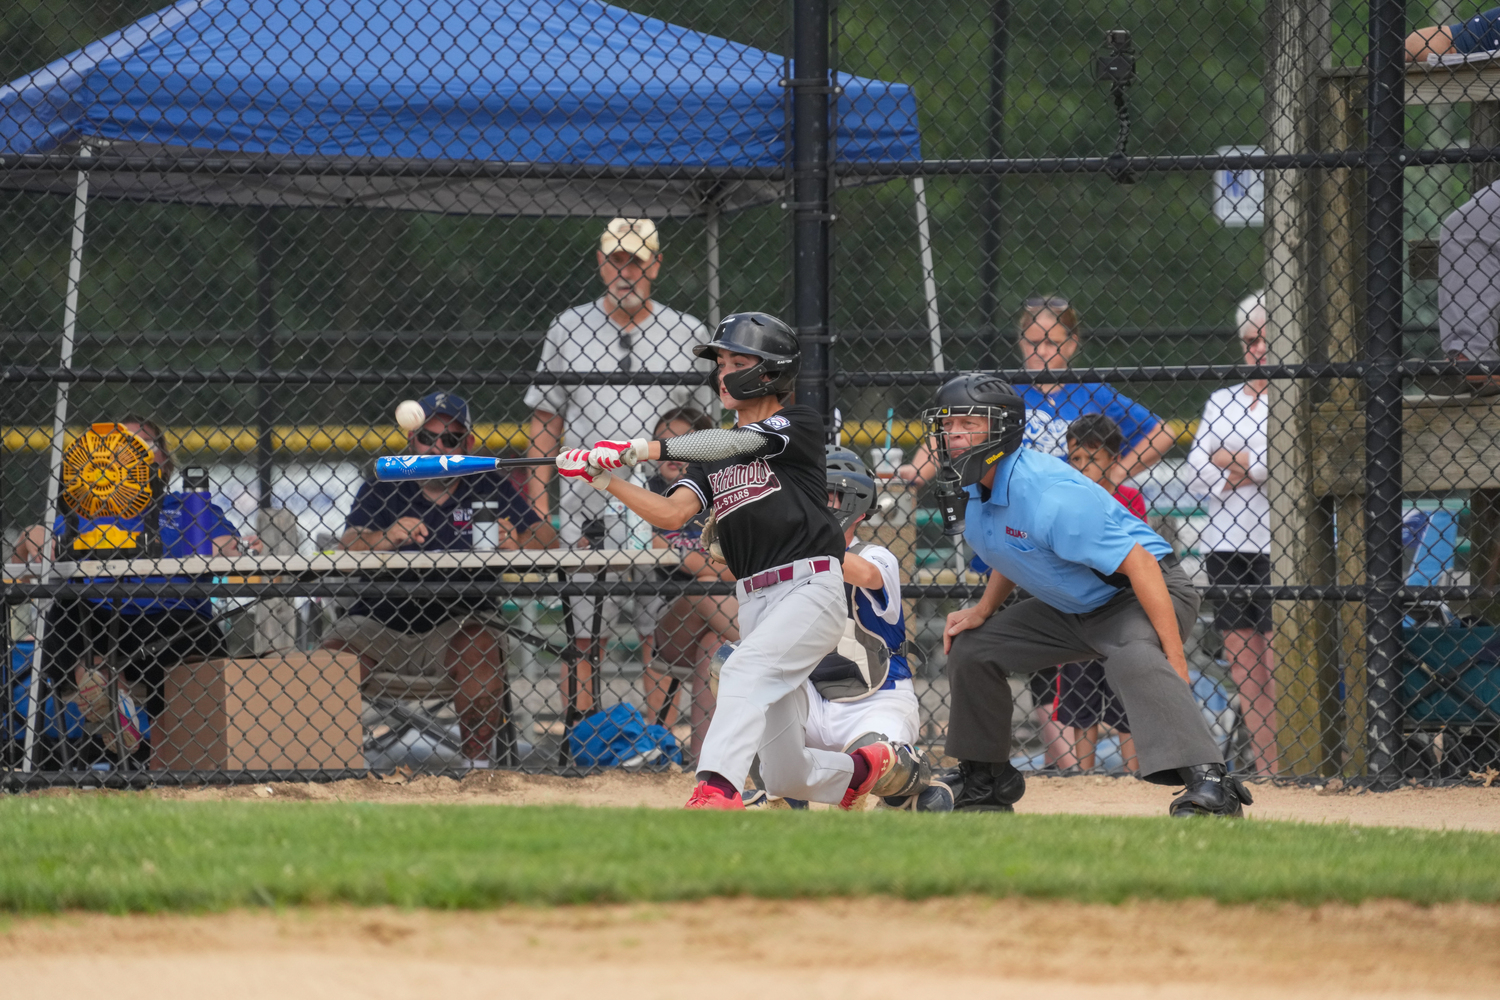 Declan Balnis had one of the four straight hits East Hampton had to start Saturday's championship game.   RON ESPOSITO